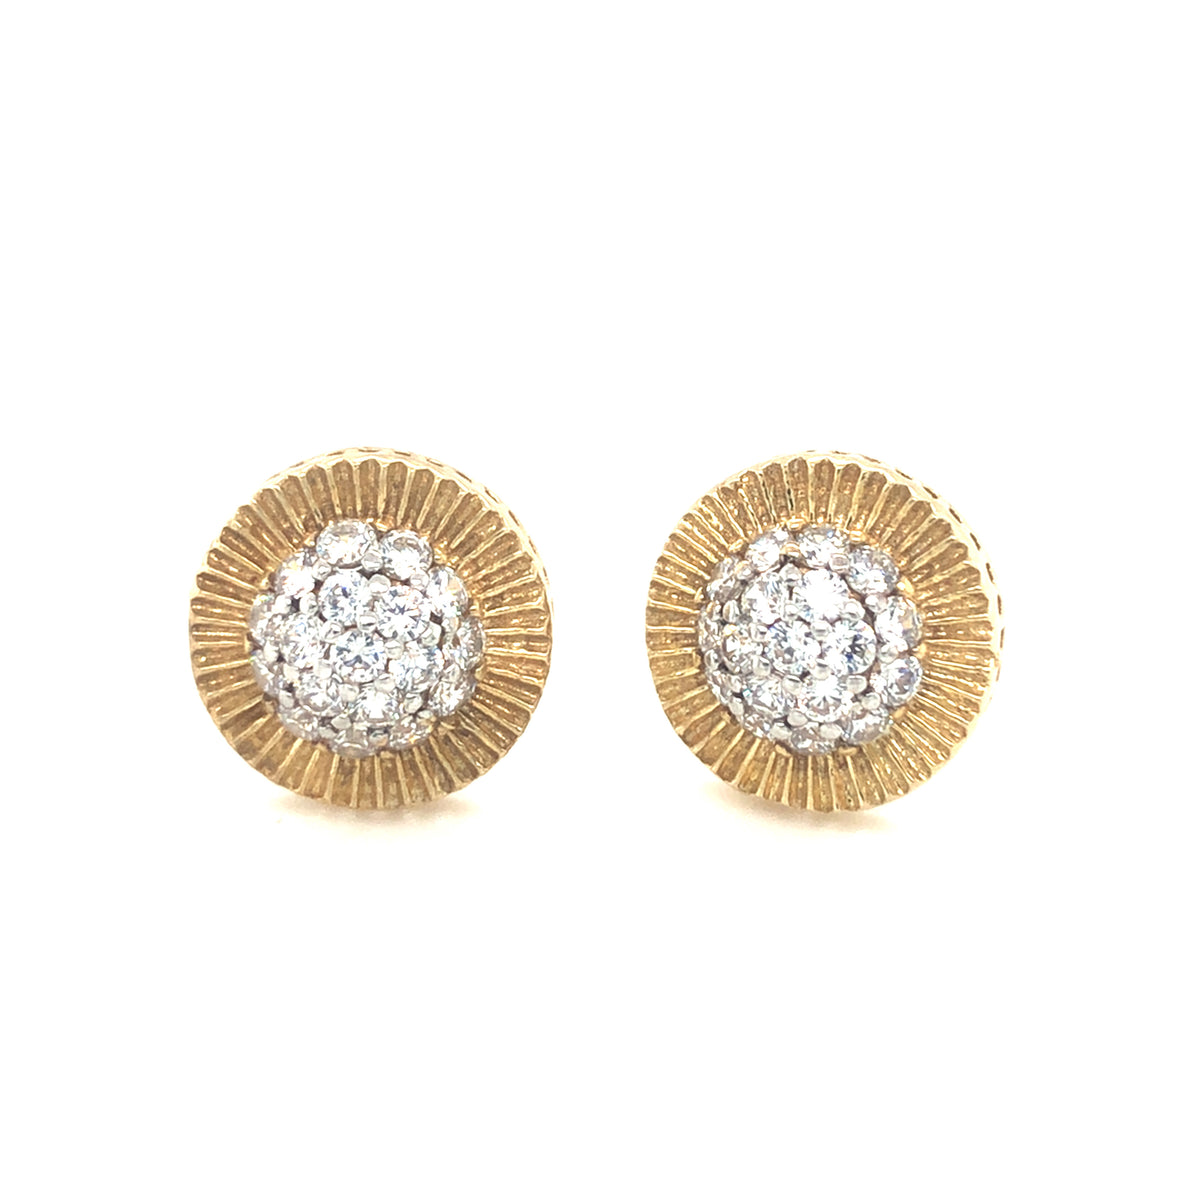 9ct Gold Rolex Style Earrings